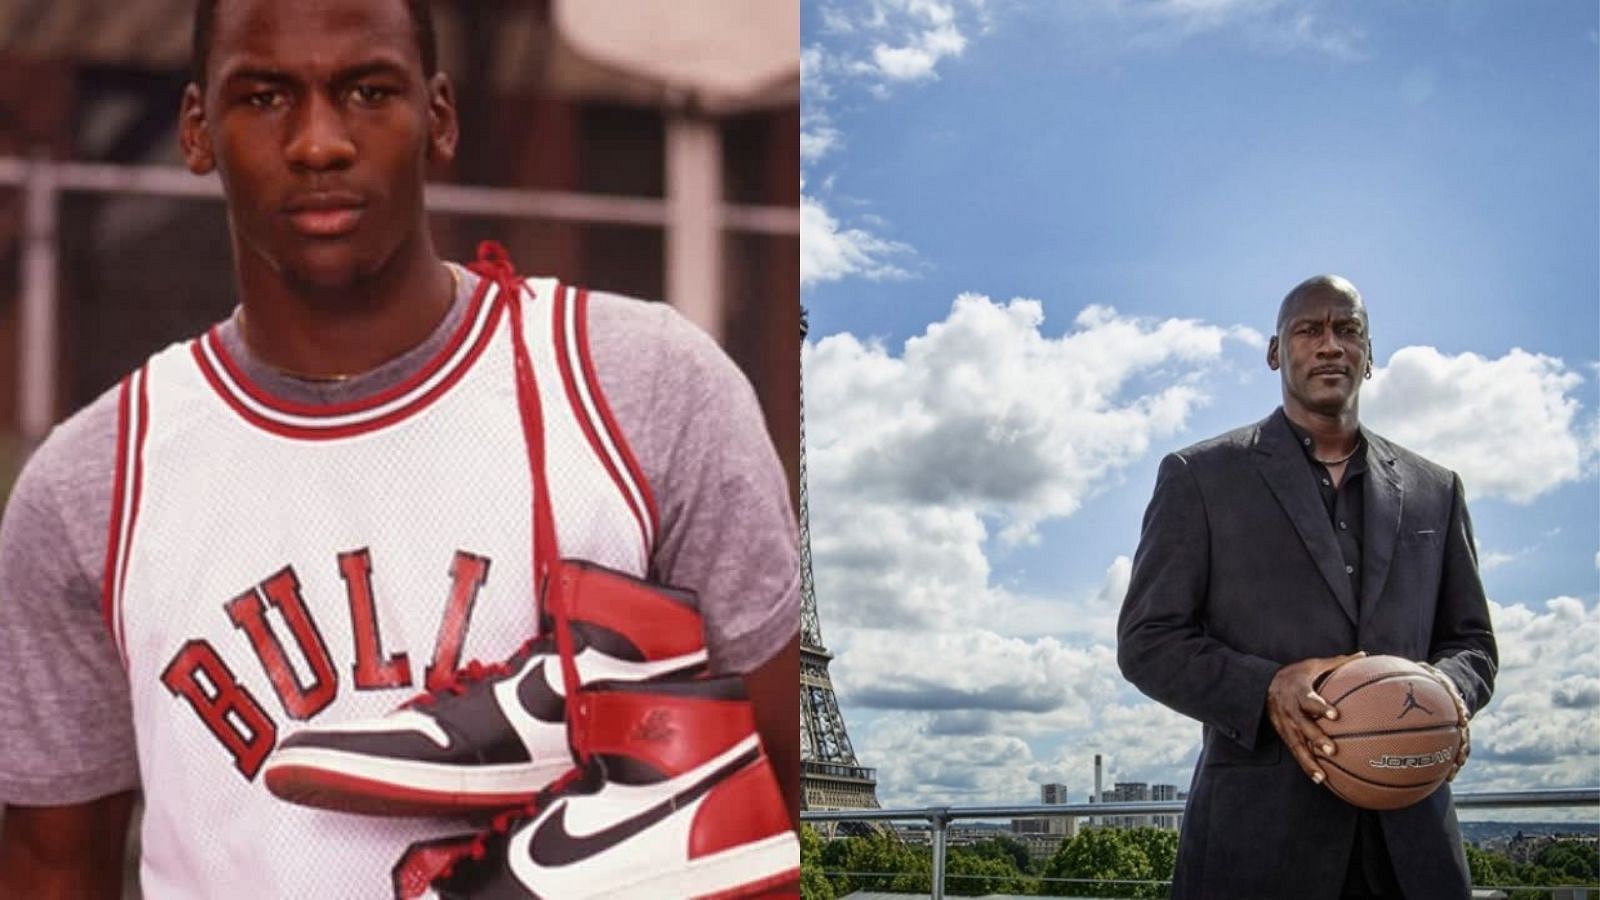 Jordan had to fulfill only ONE of Nike's conditions, he fulfilled them ALL": When a rookie MJ exceeded all expectations to get the biggest shoe deal in sports history - The